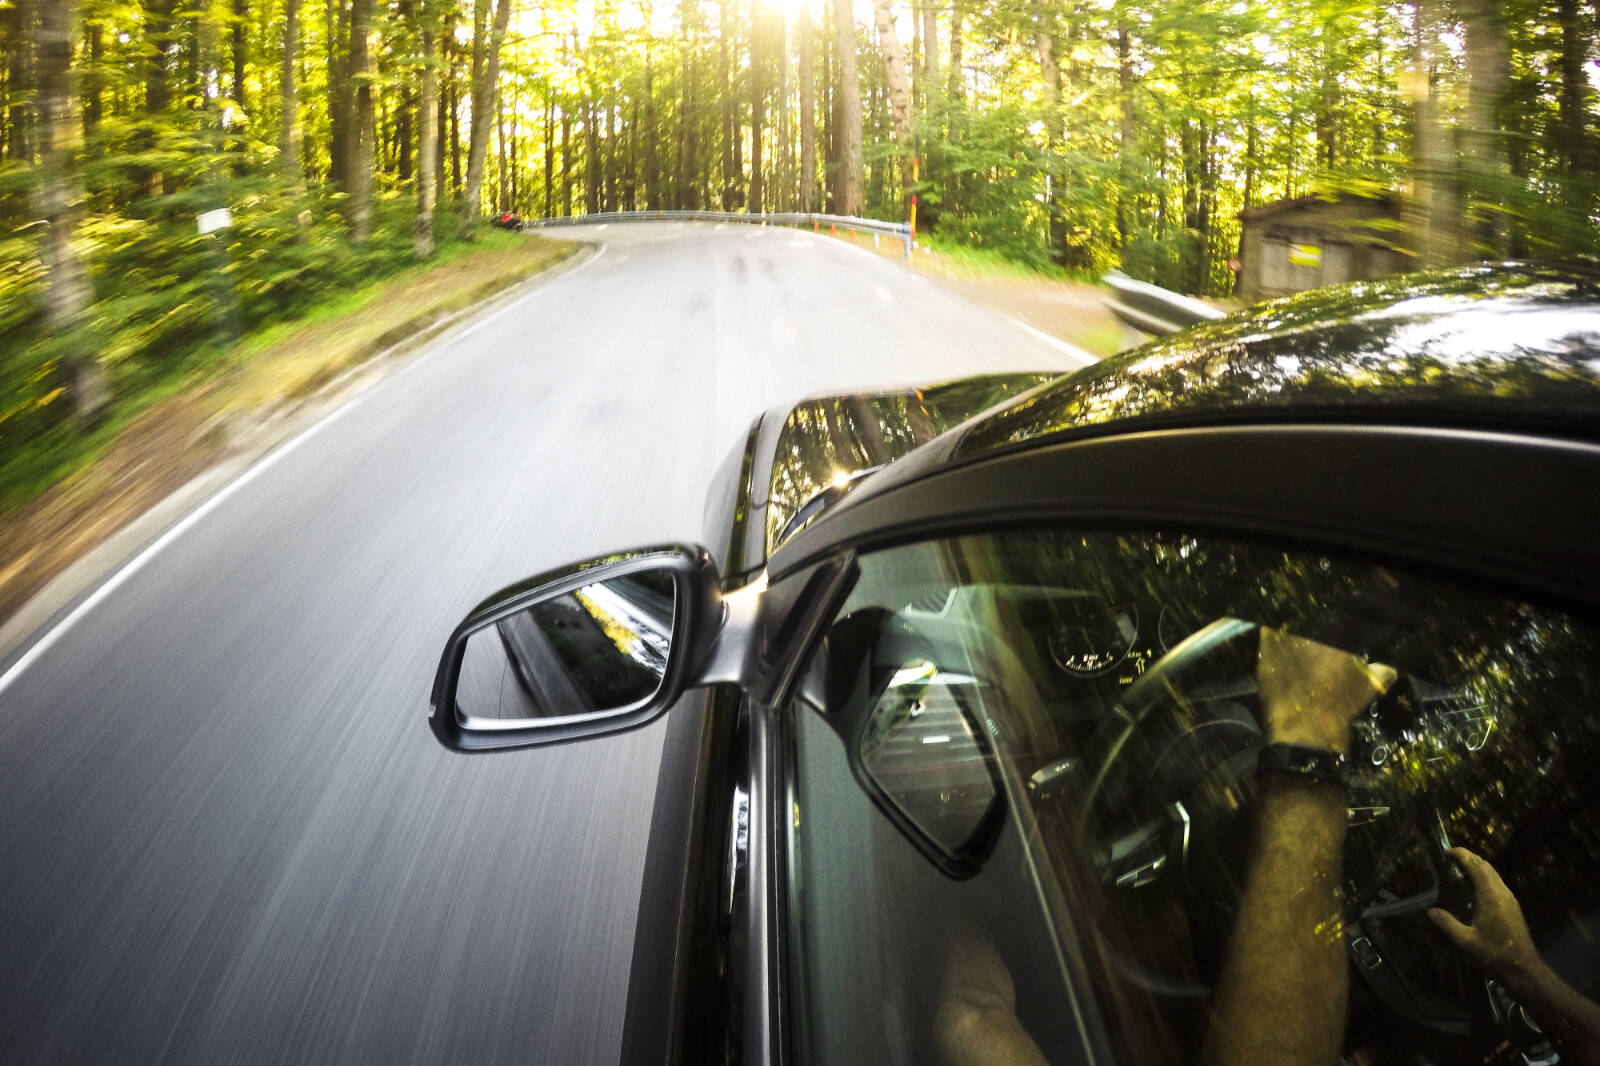 If a road trip is on your summer to-do list, Hello BC provides some great information on some of the province’s most scenic drives, and DriveBC provides invaluable driving condition updates. Stock